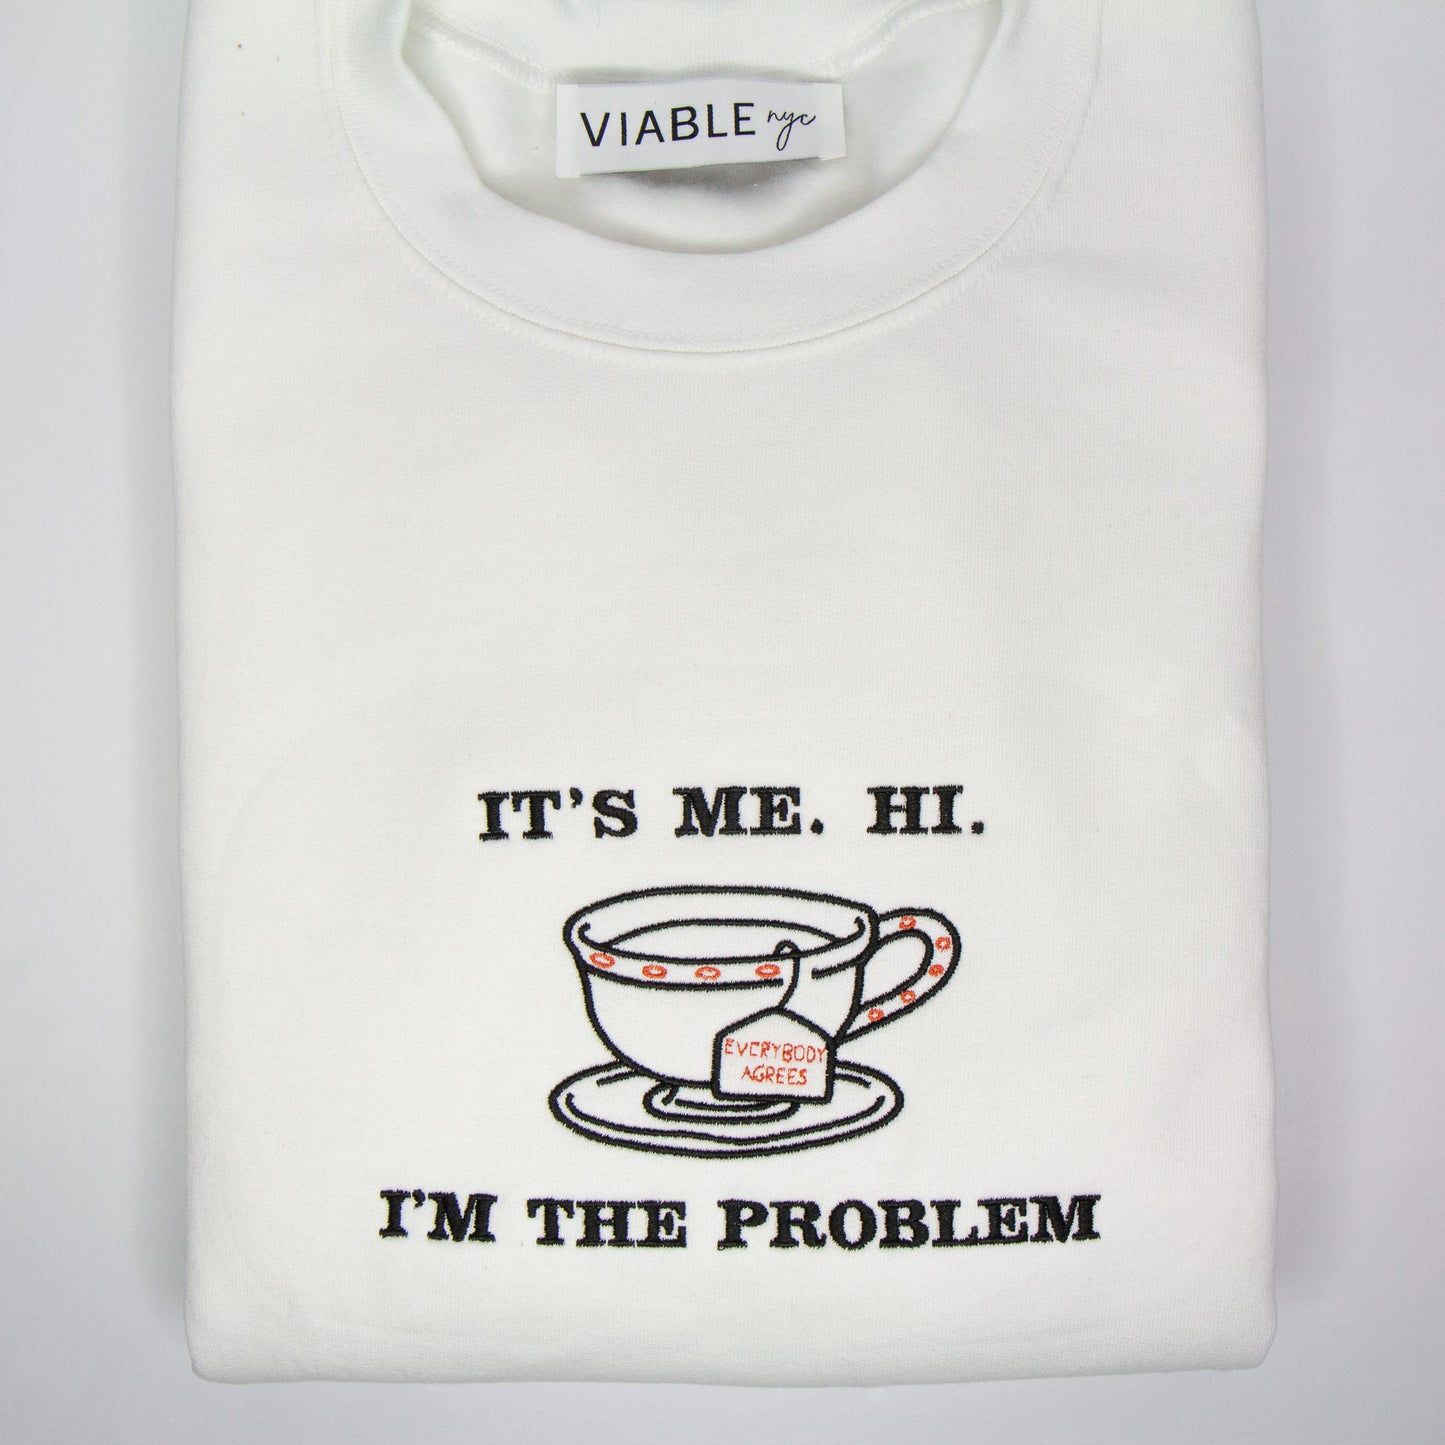 It's Me. Hi. I'm the Problem (Everybody Agrees) Crewneck | Midnights by Taylor Swift